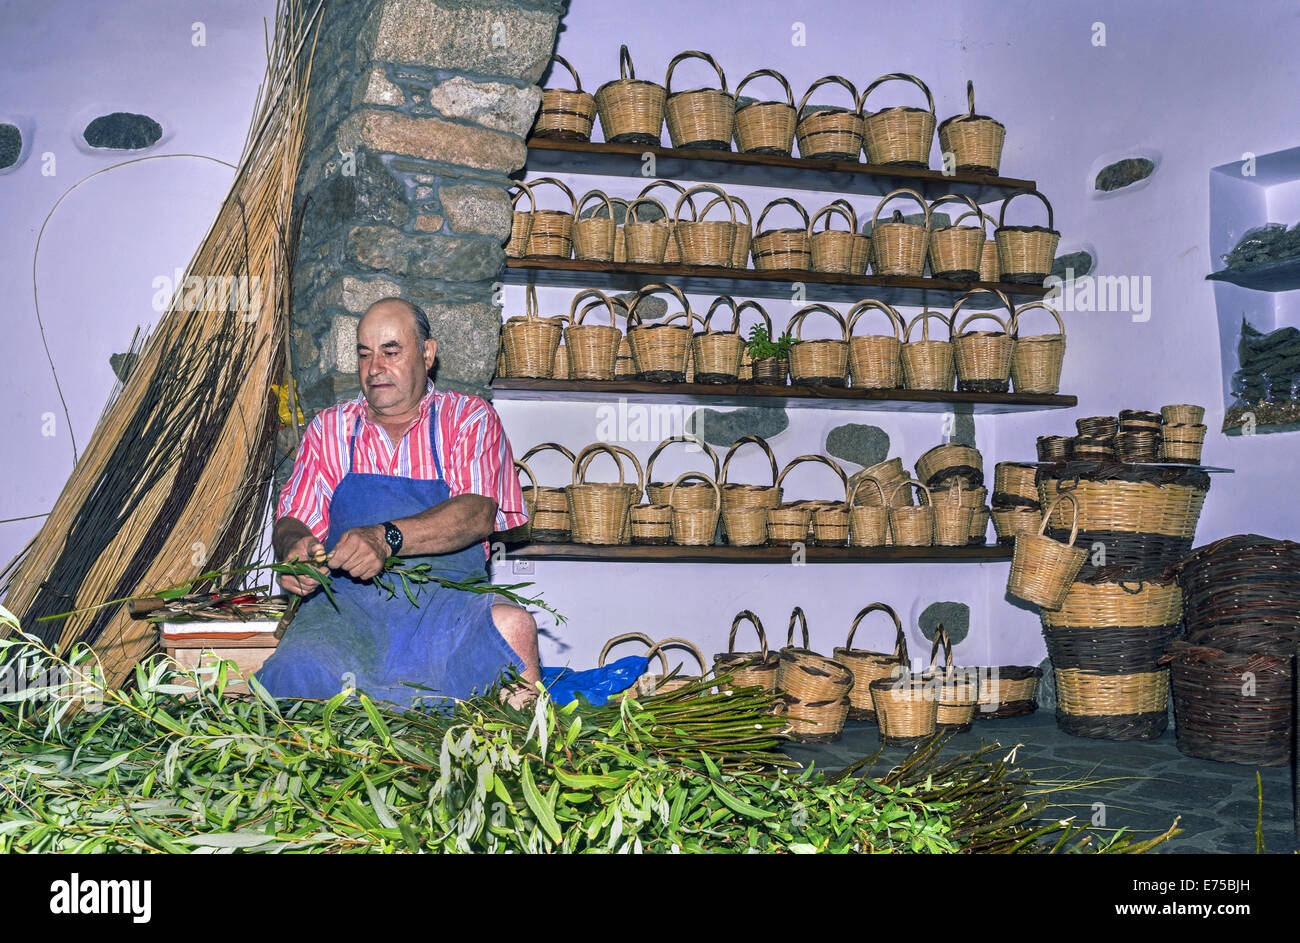 Loudovikos is one of the last traditional basket makers left in Volax village in Tinos island, Cyclades, Greece Stock Photo